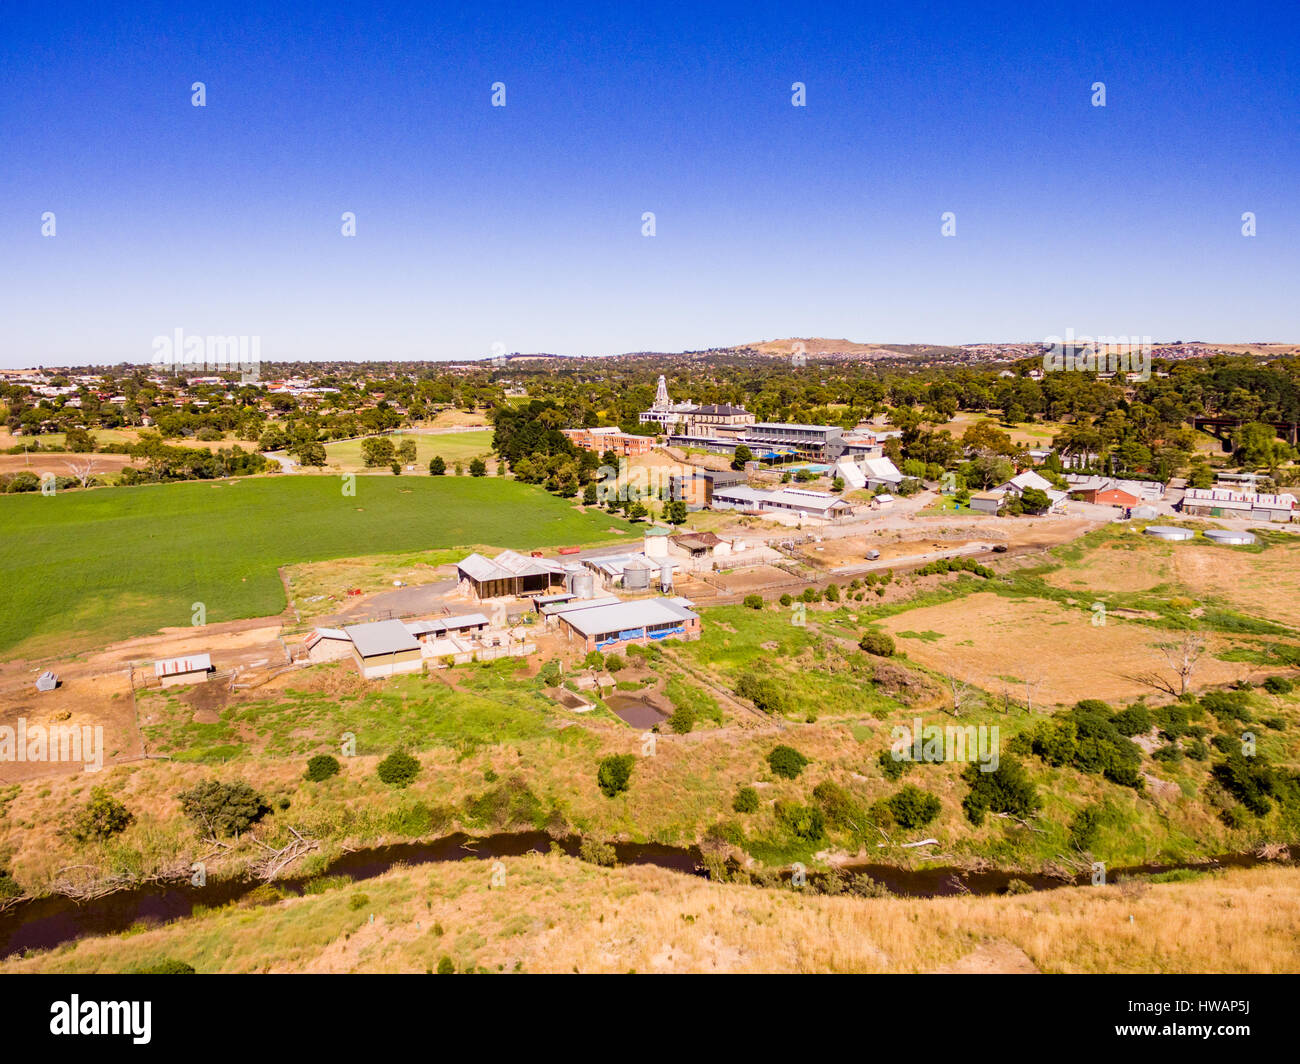 Salesian College High School and Rupertswood Mansion in Sunbury Victoria Australia. Image taken from an Unmanned Aerial Vehicle (UAV), or drone. Stock Photo